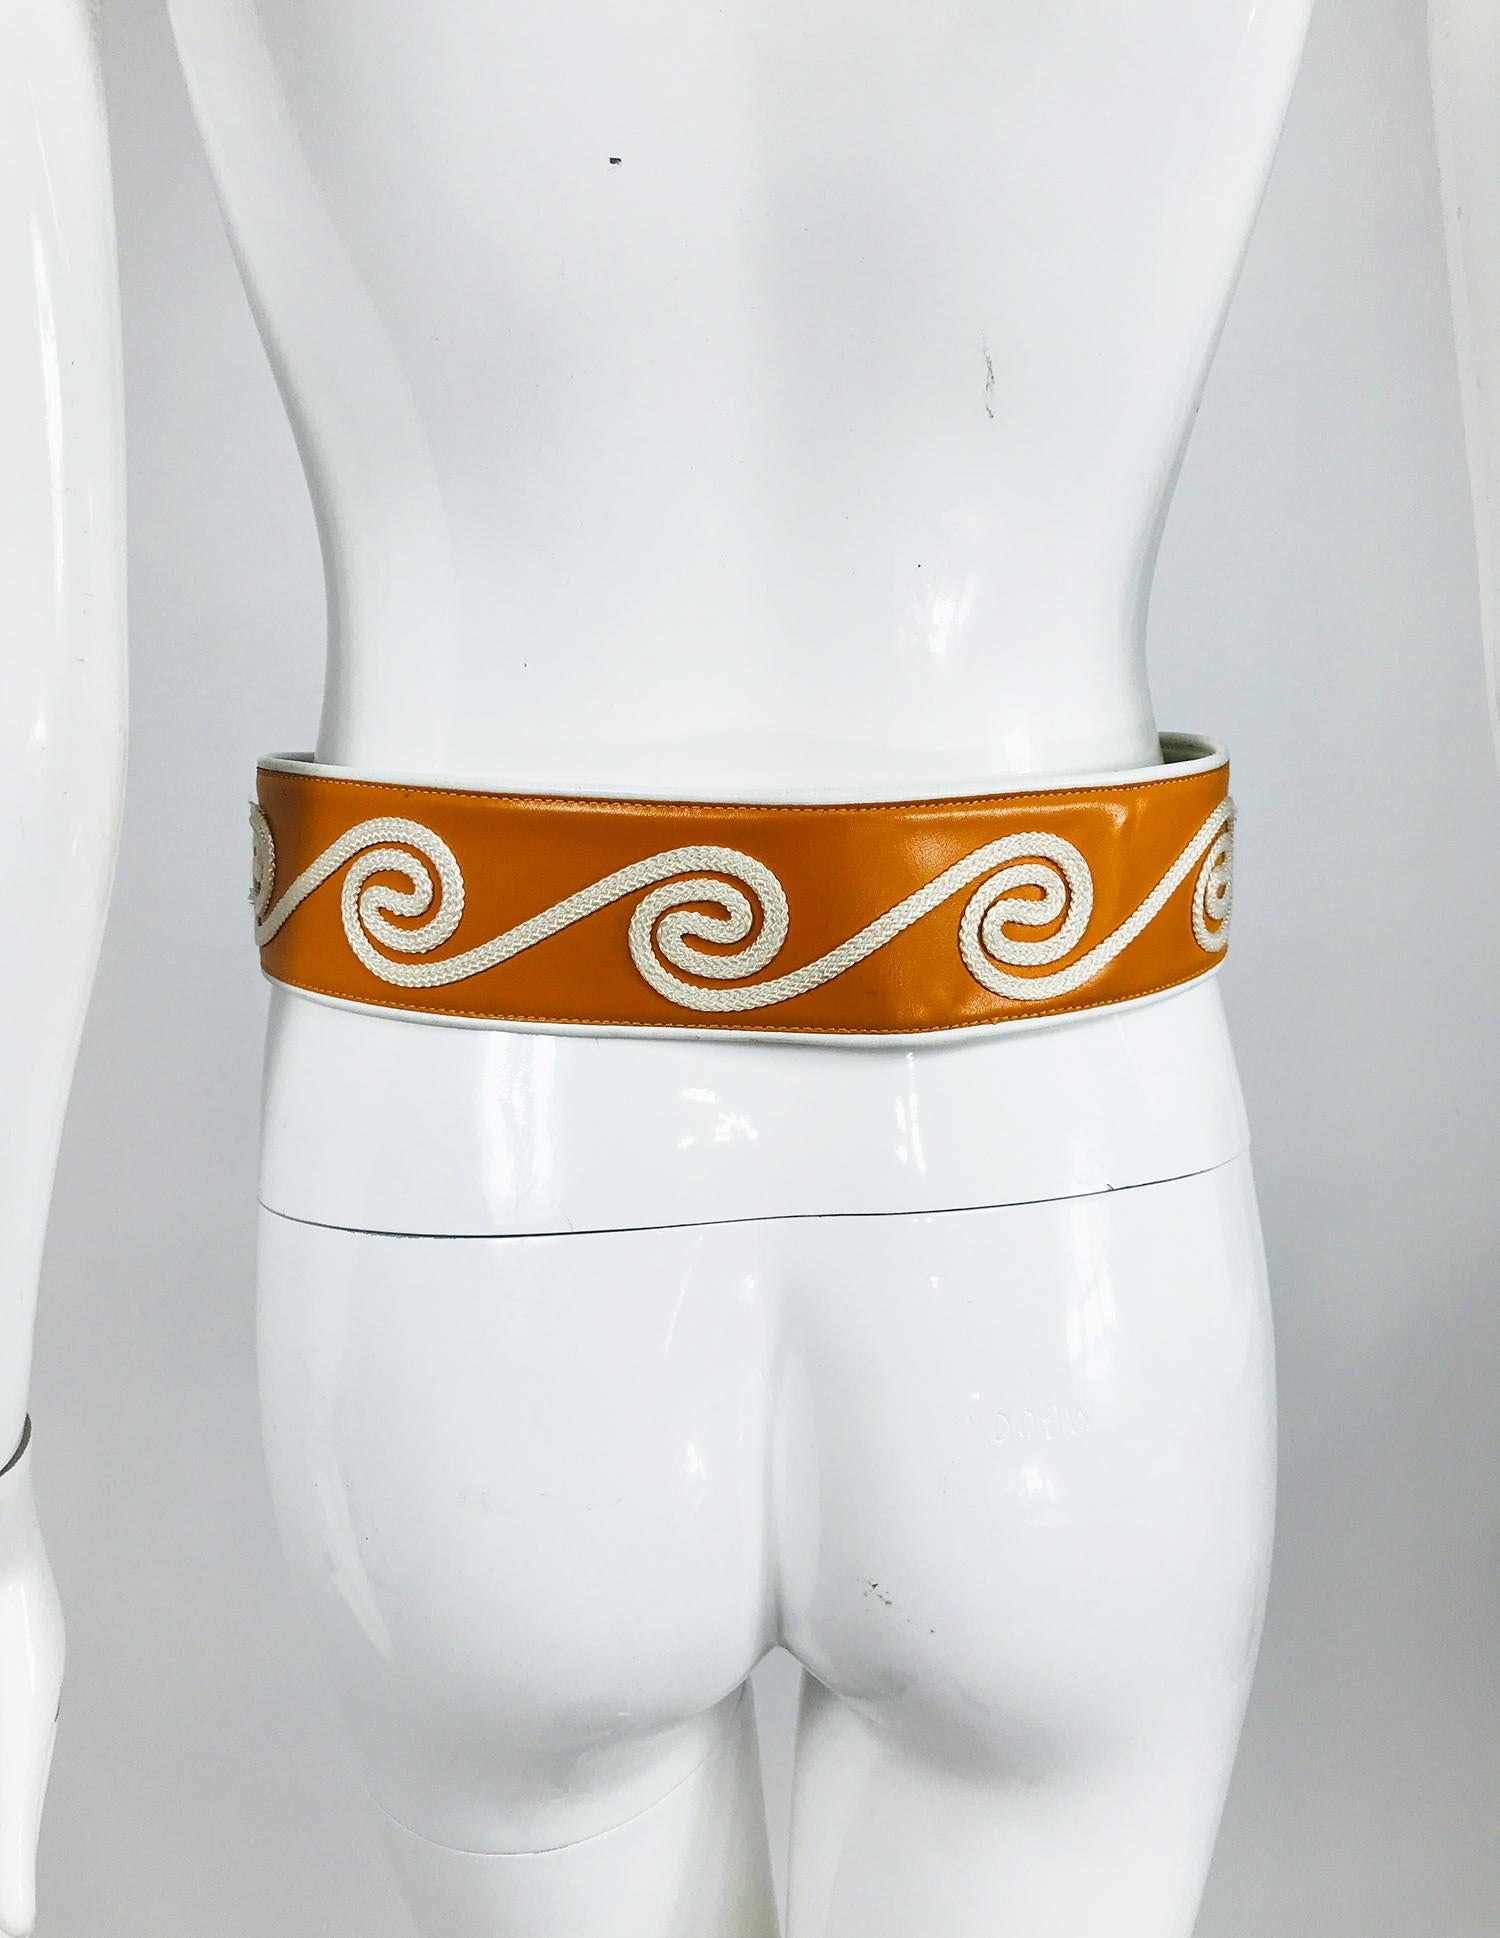 Women's  Christian Dior White & Golden Yellow Cord Applique Wide Leather Belt M-L 1990s For Sale